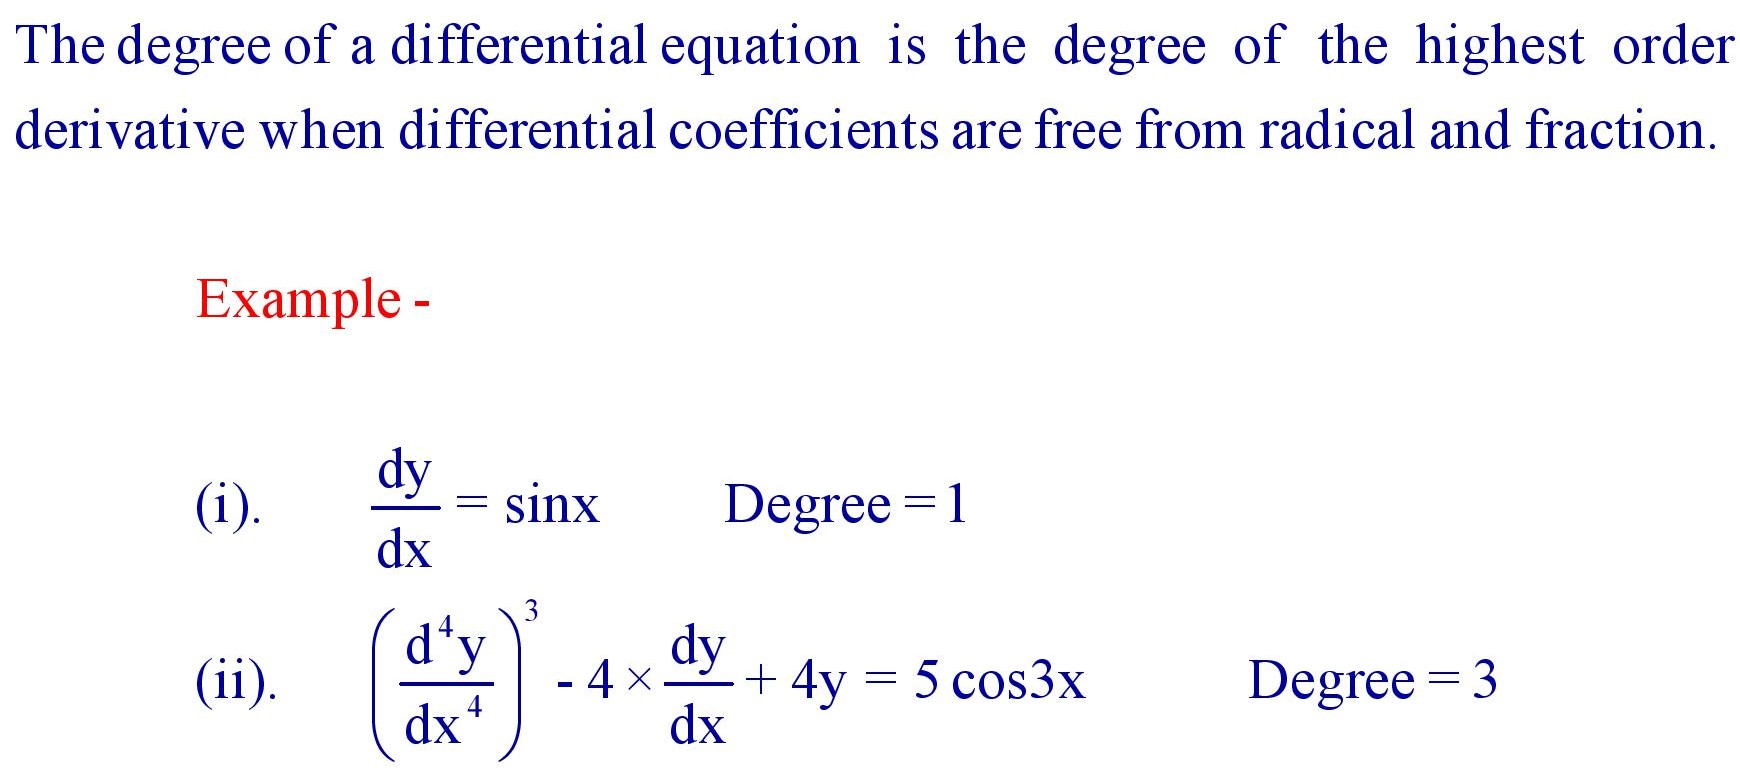 Degree of Differential Equation